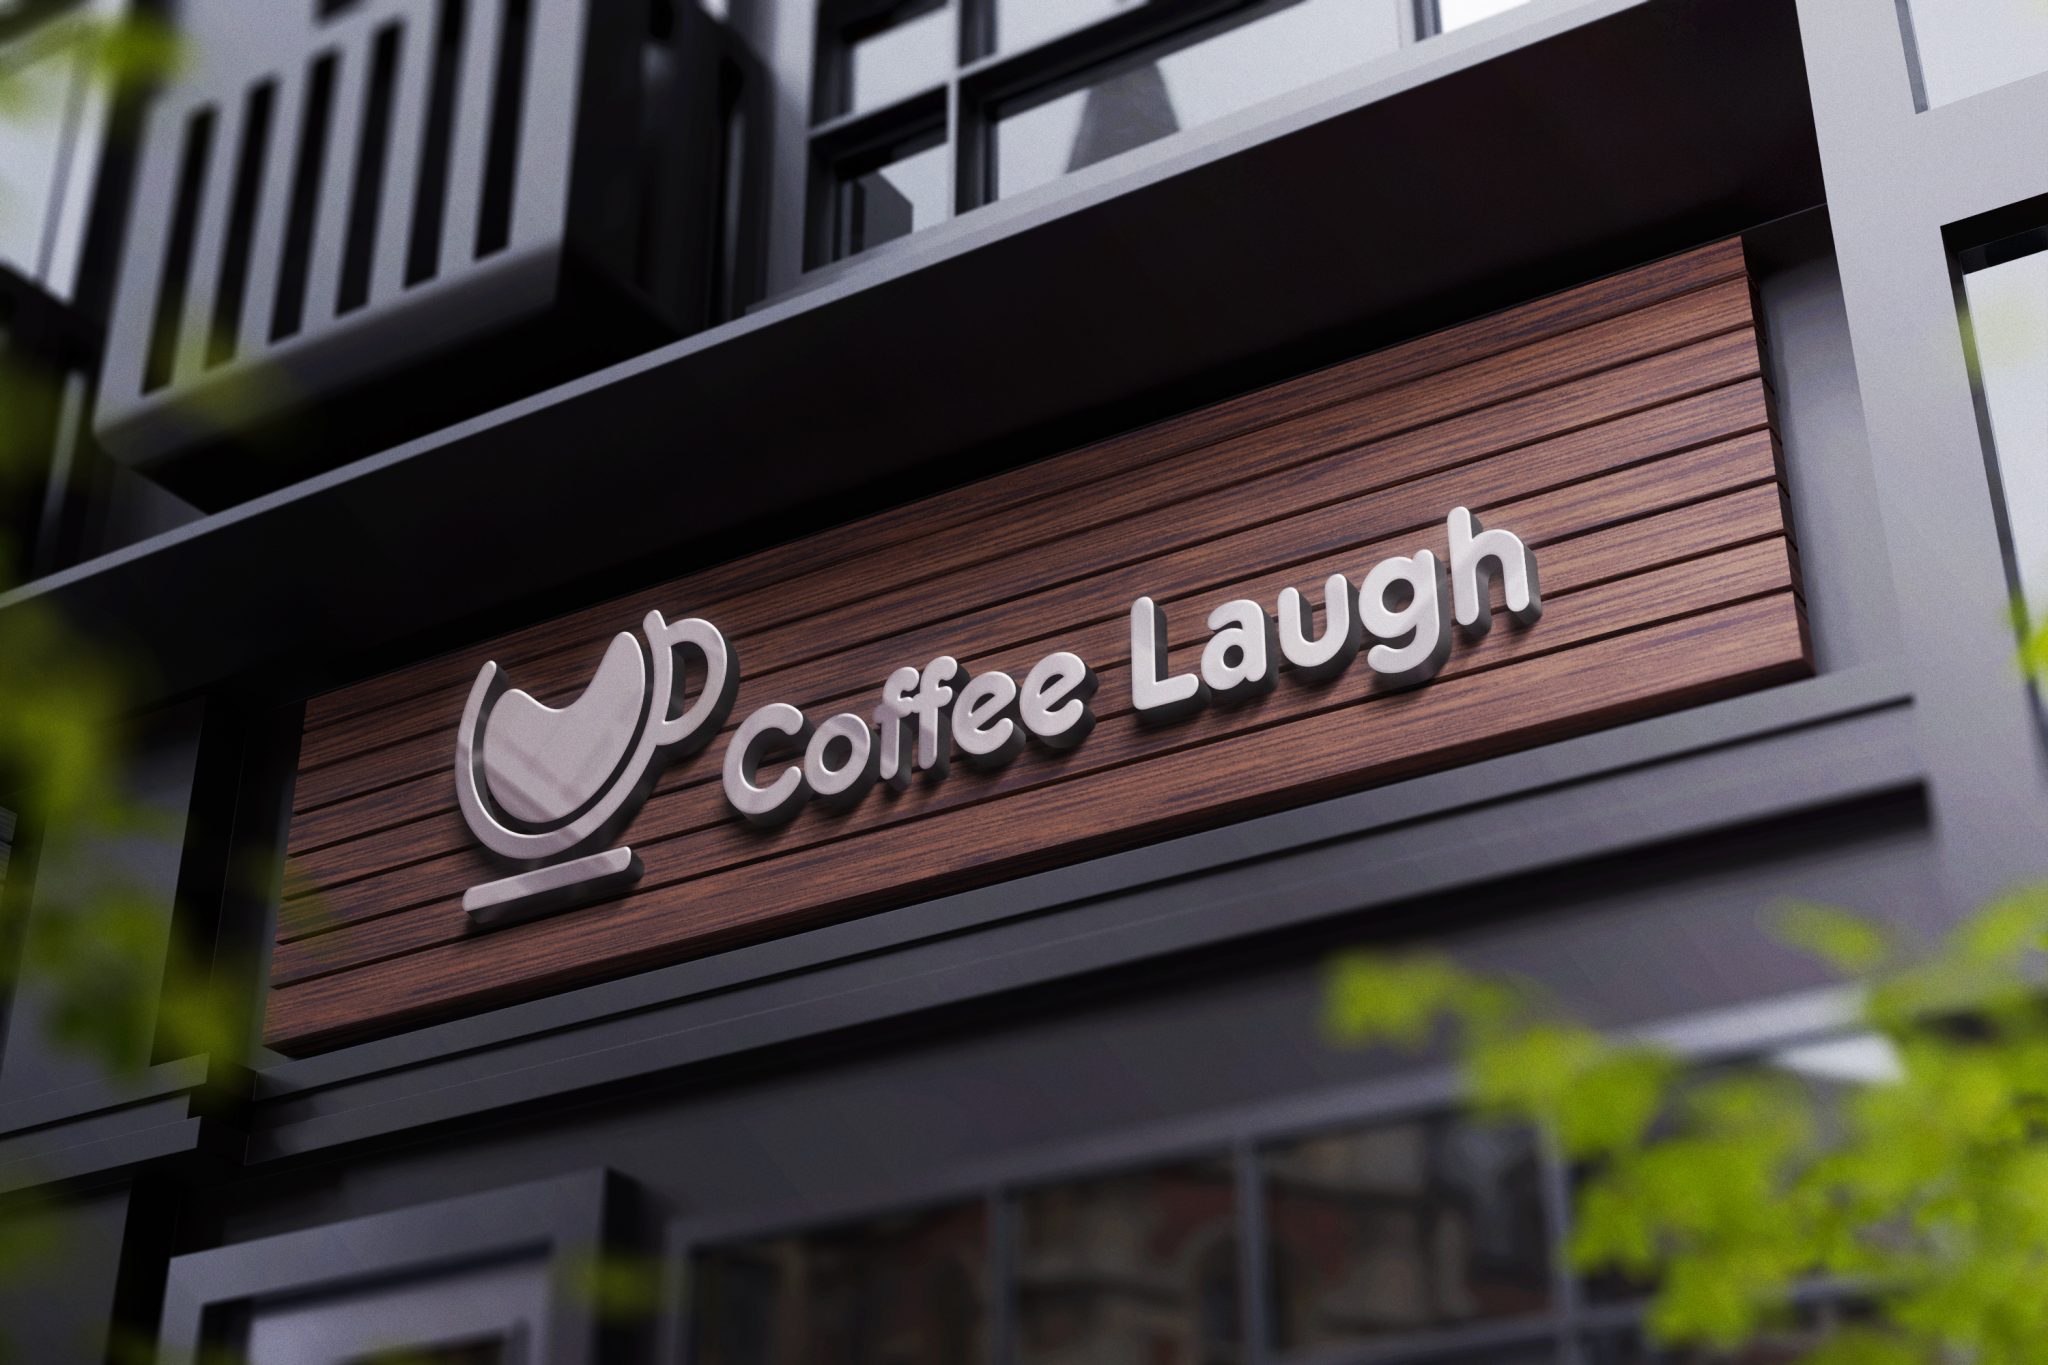 Business Storefront Sign - Coffee Laugh